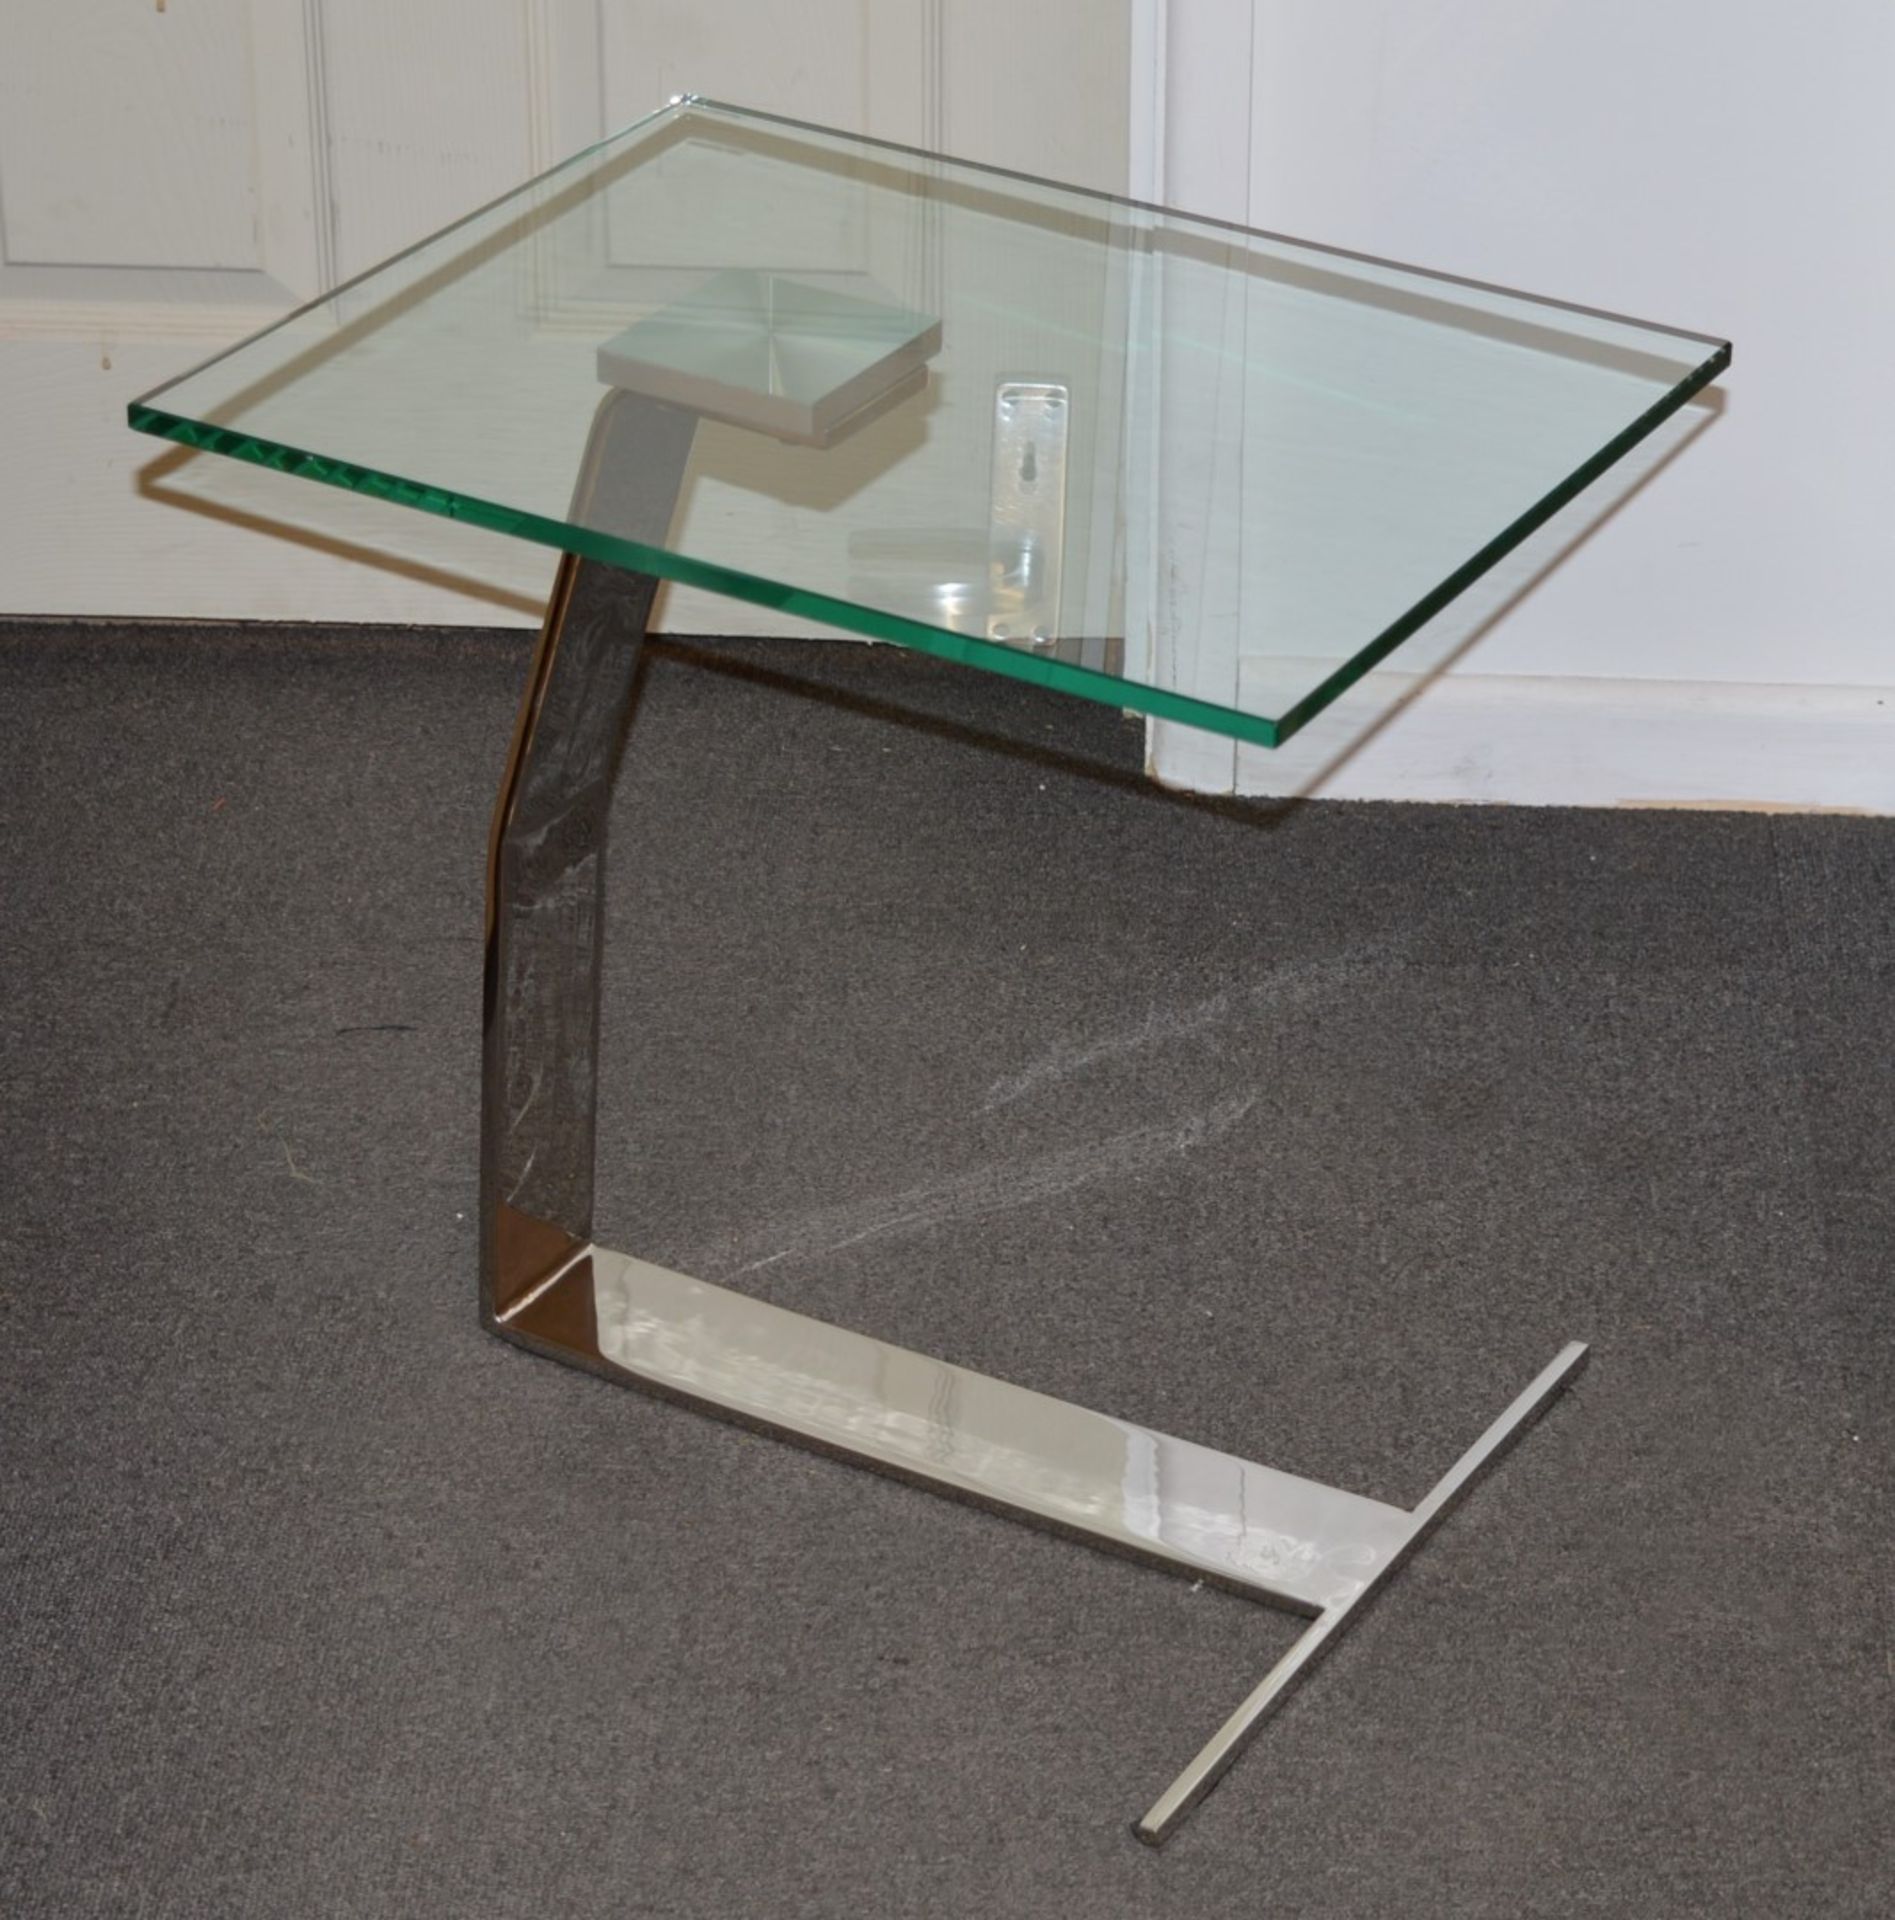 1 x Designer Chelsom Lamp Table - CL081 - Chrome Base With Clear Tempered Glass Top - Stunning - Image 2 of 6